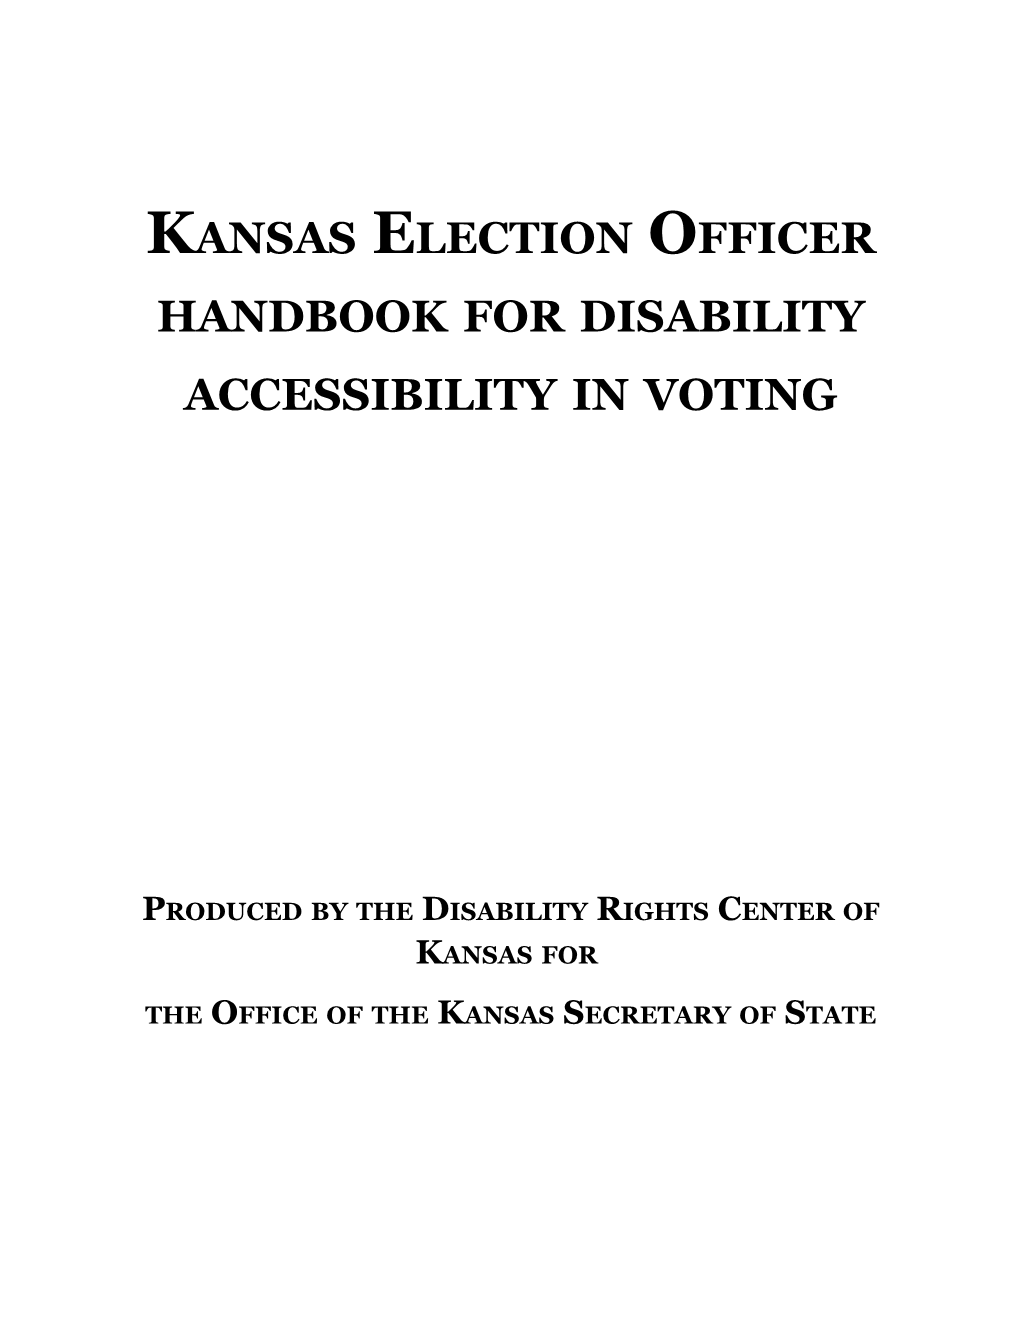 Kansas Election Officer Handbook for Disability Accessibility in Voting